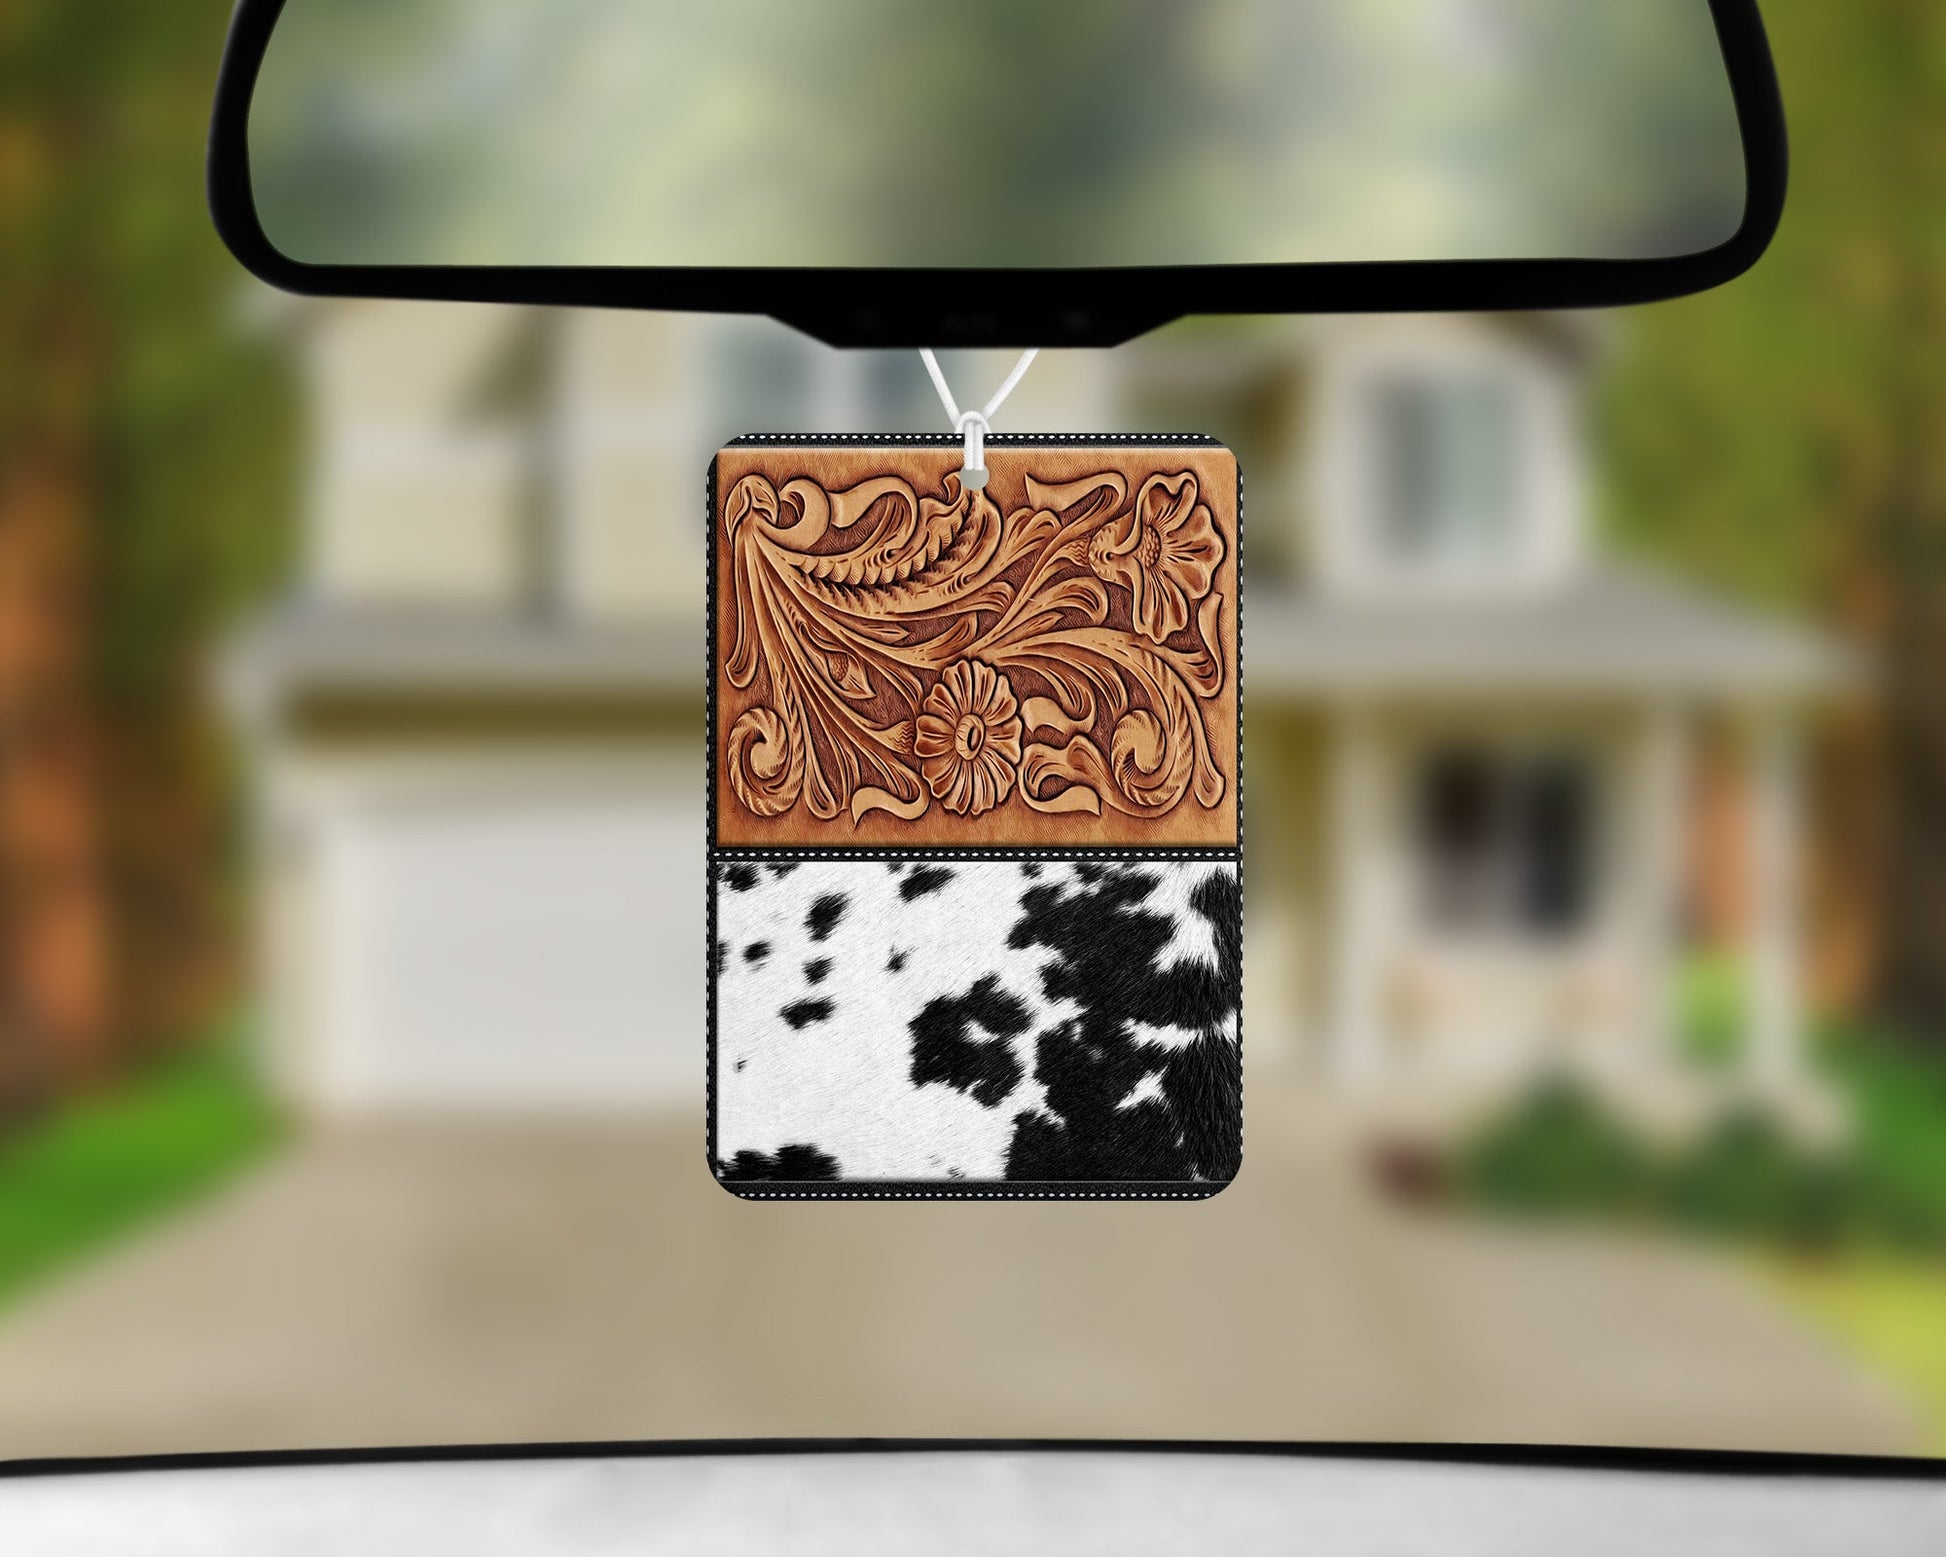 Leather Cowhide|Freshie|Includes Scent Bottle - Vehicle Air Freshener